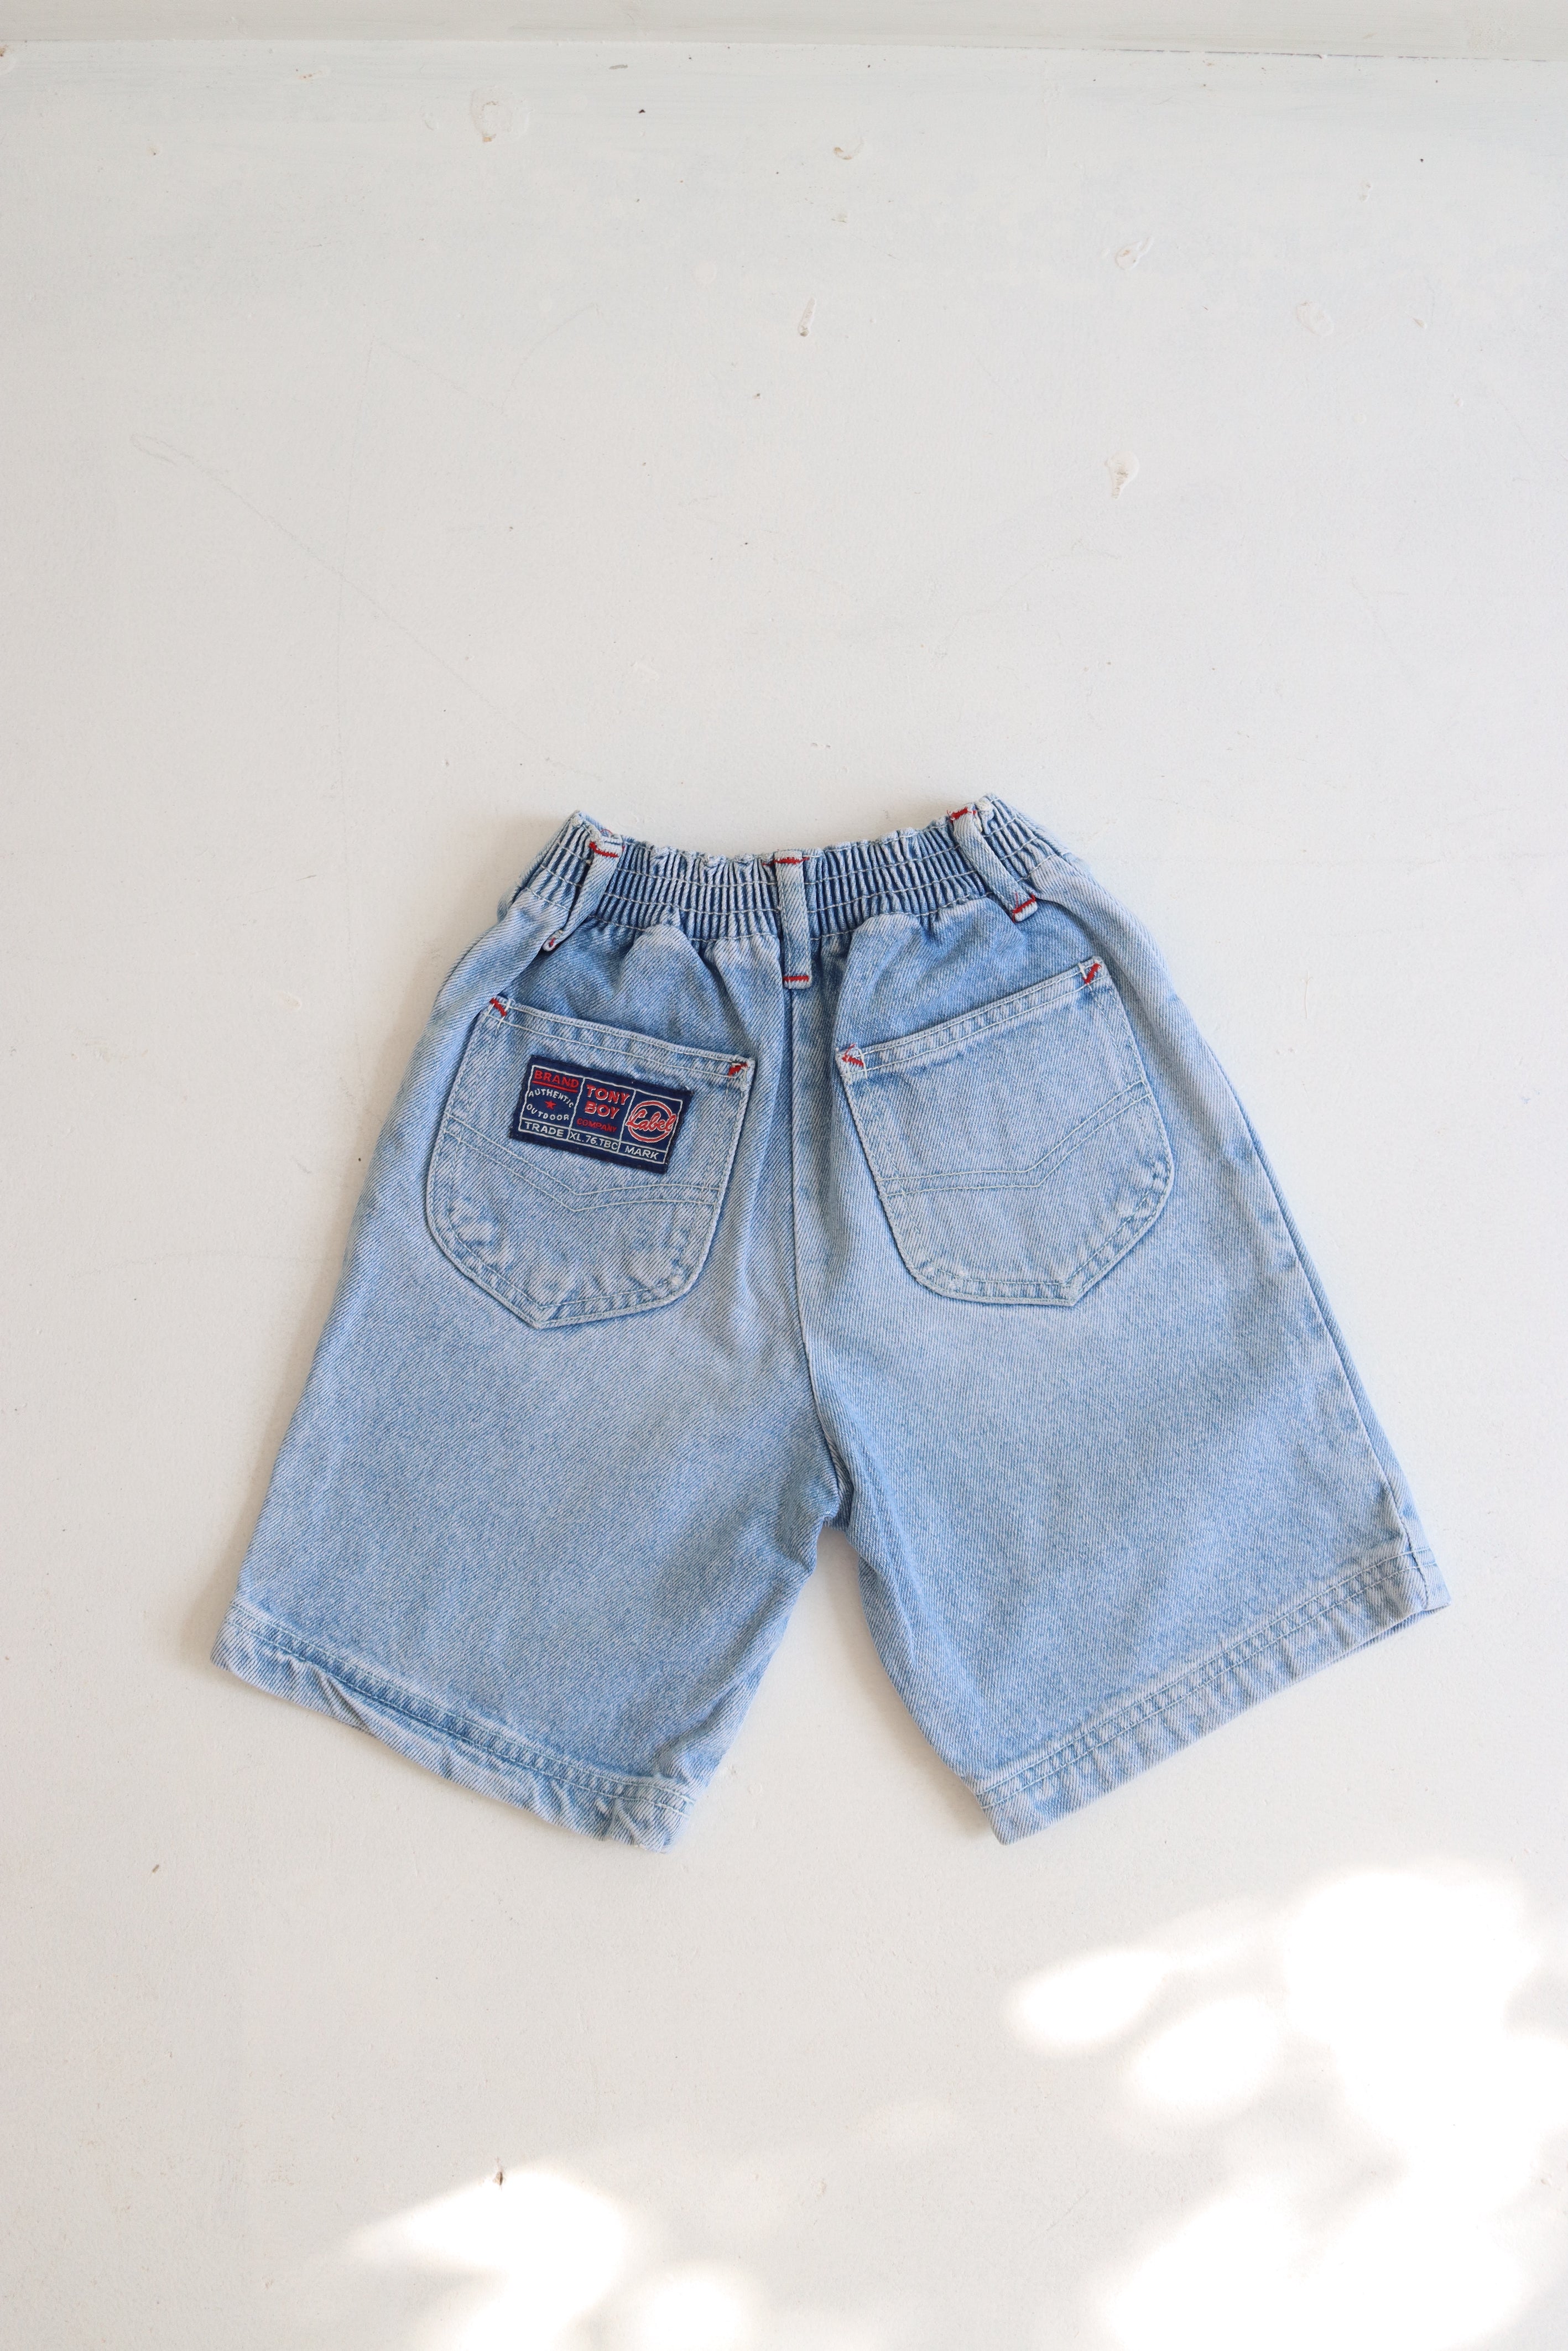 French lightwash shorts - size 4 years - made in France